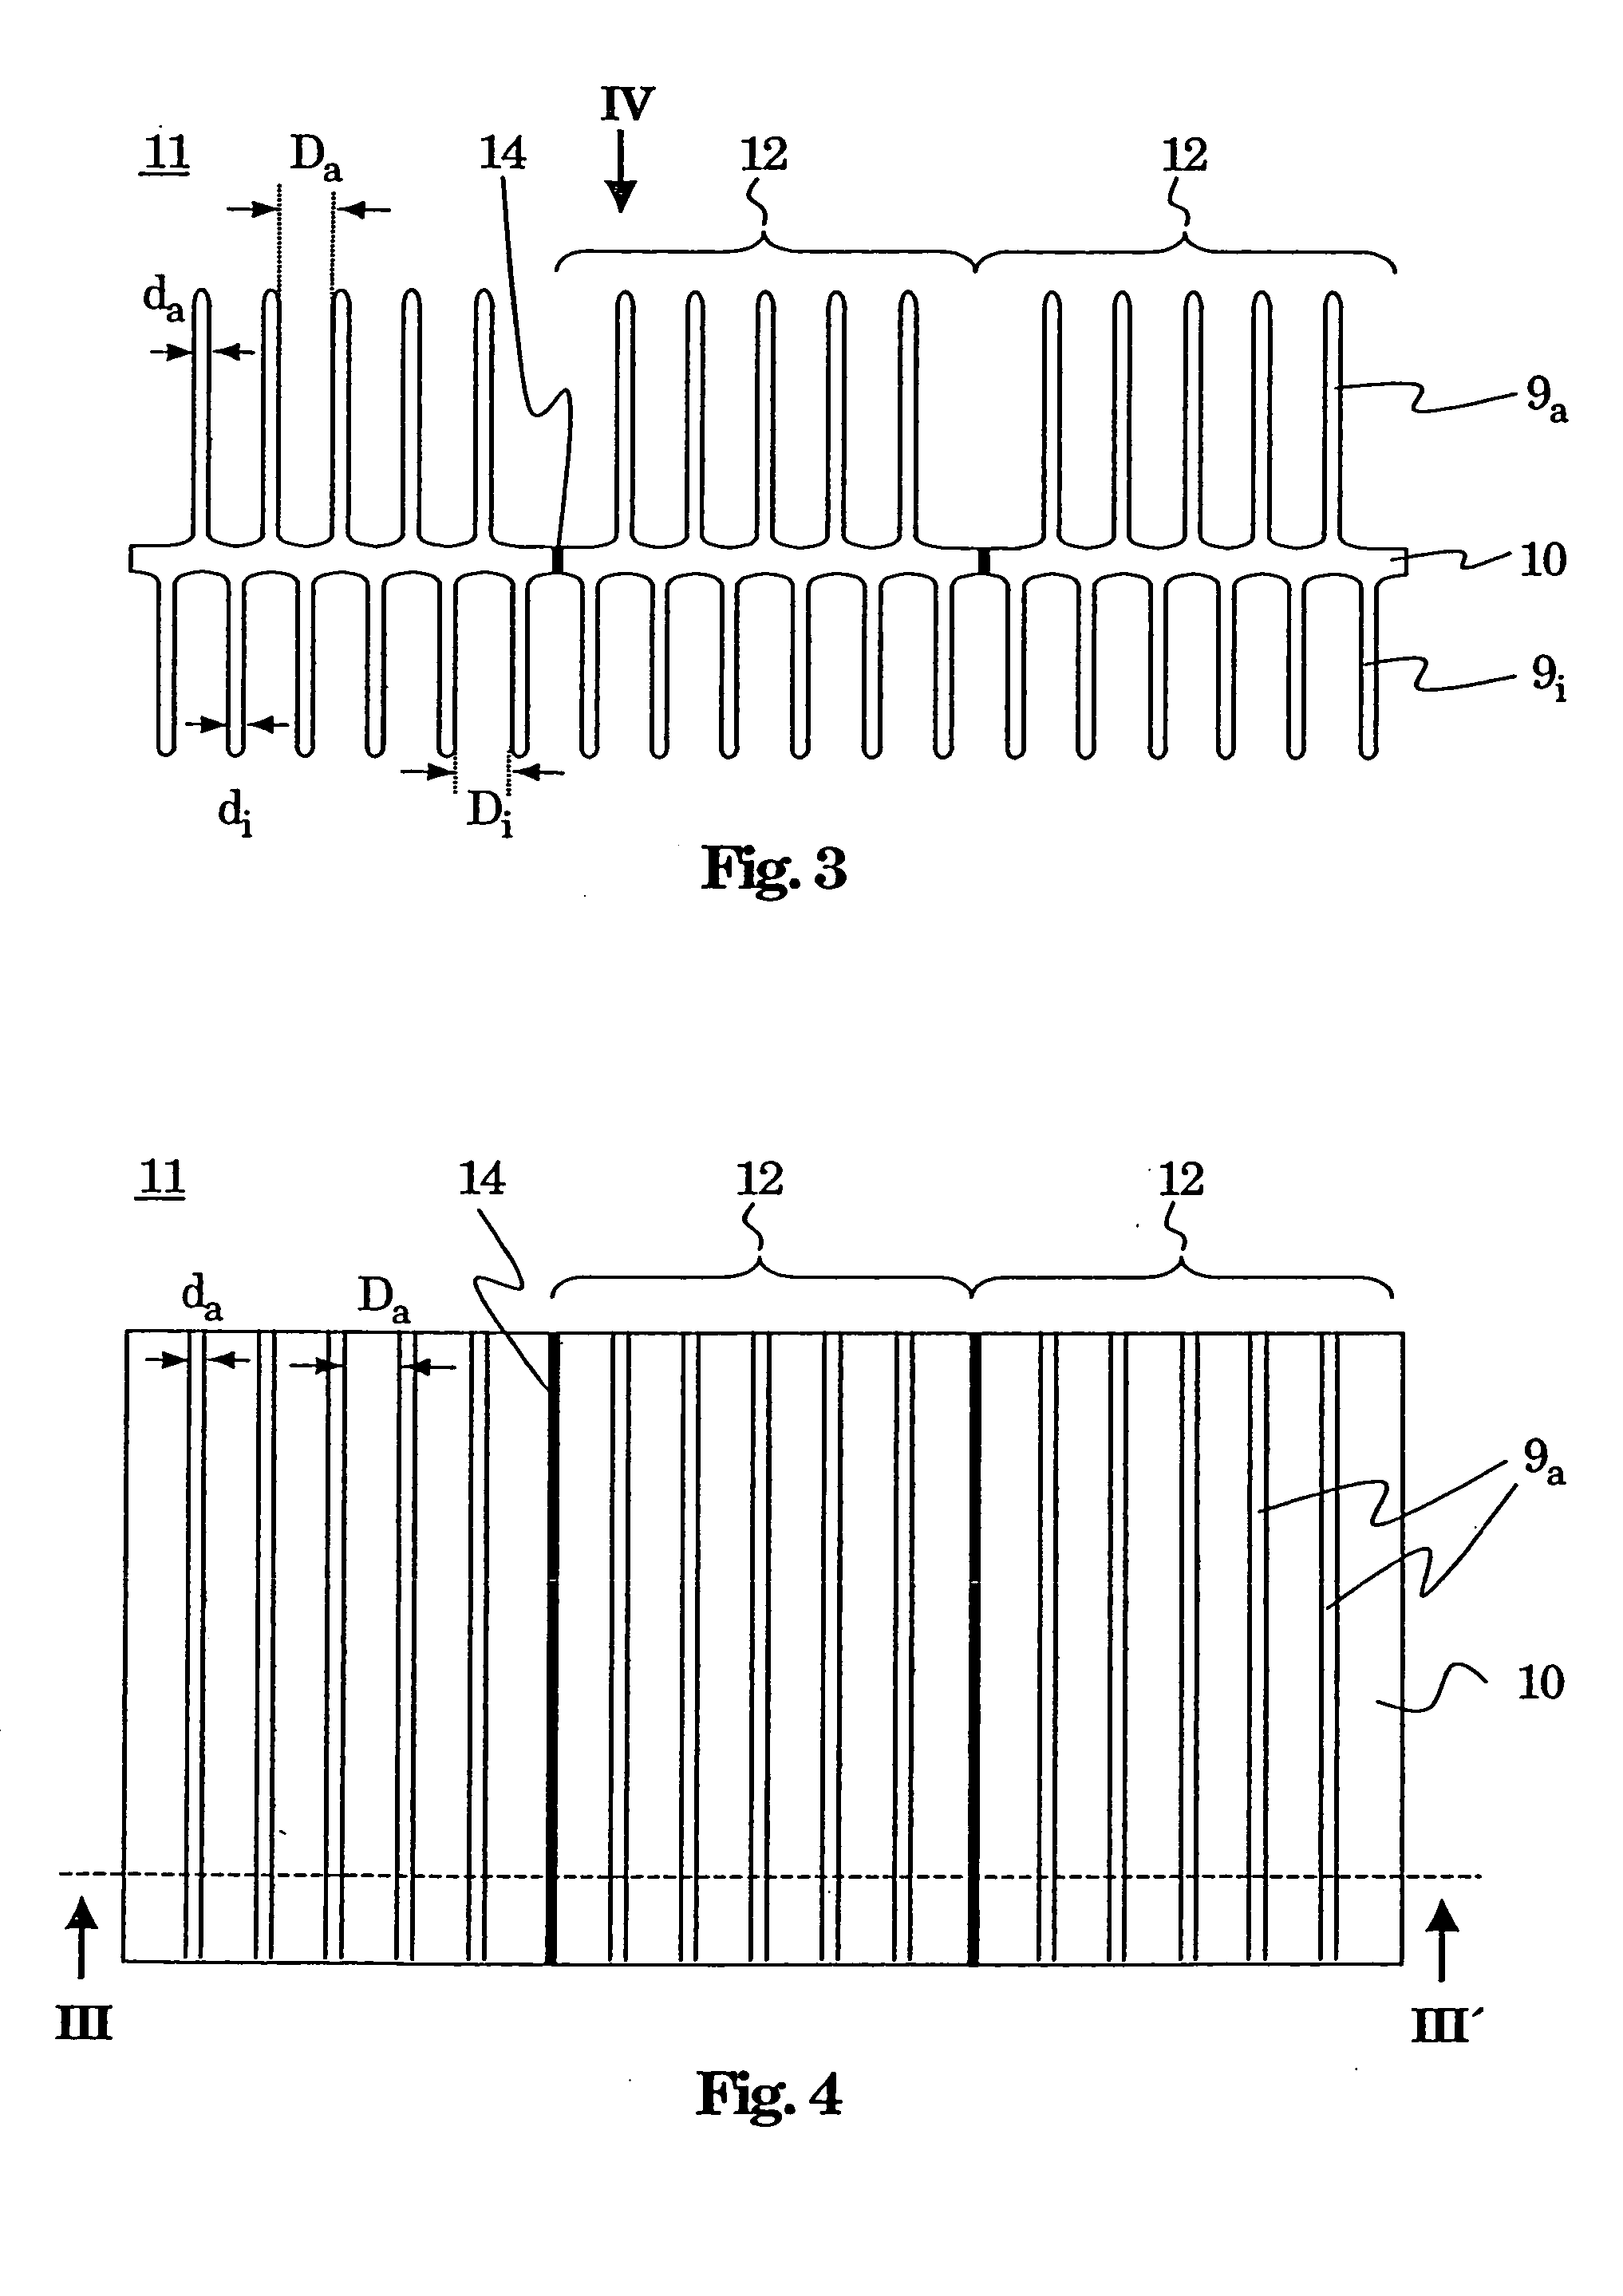 High-power switchgear with cooling rib arrangement